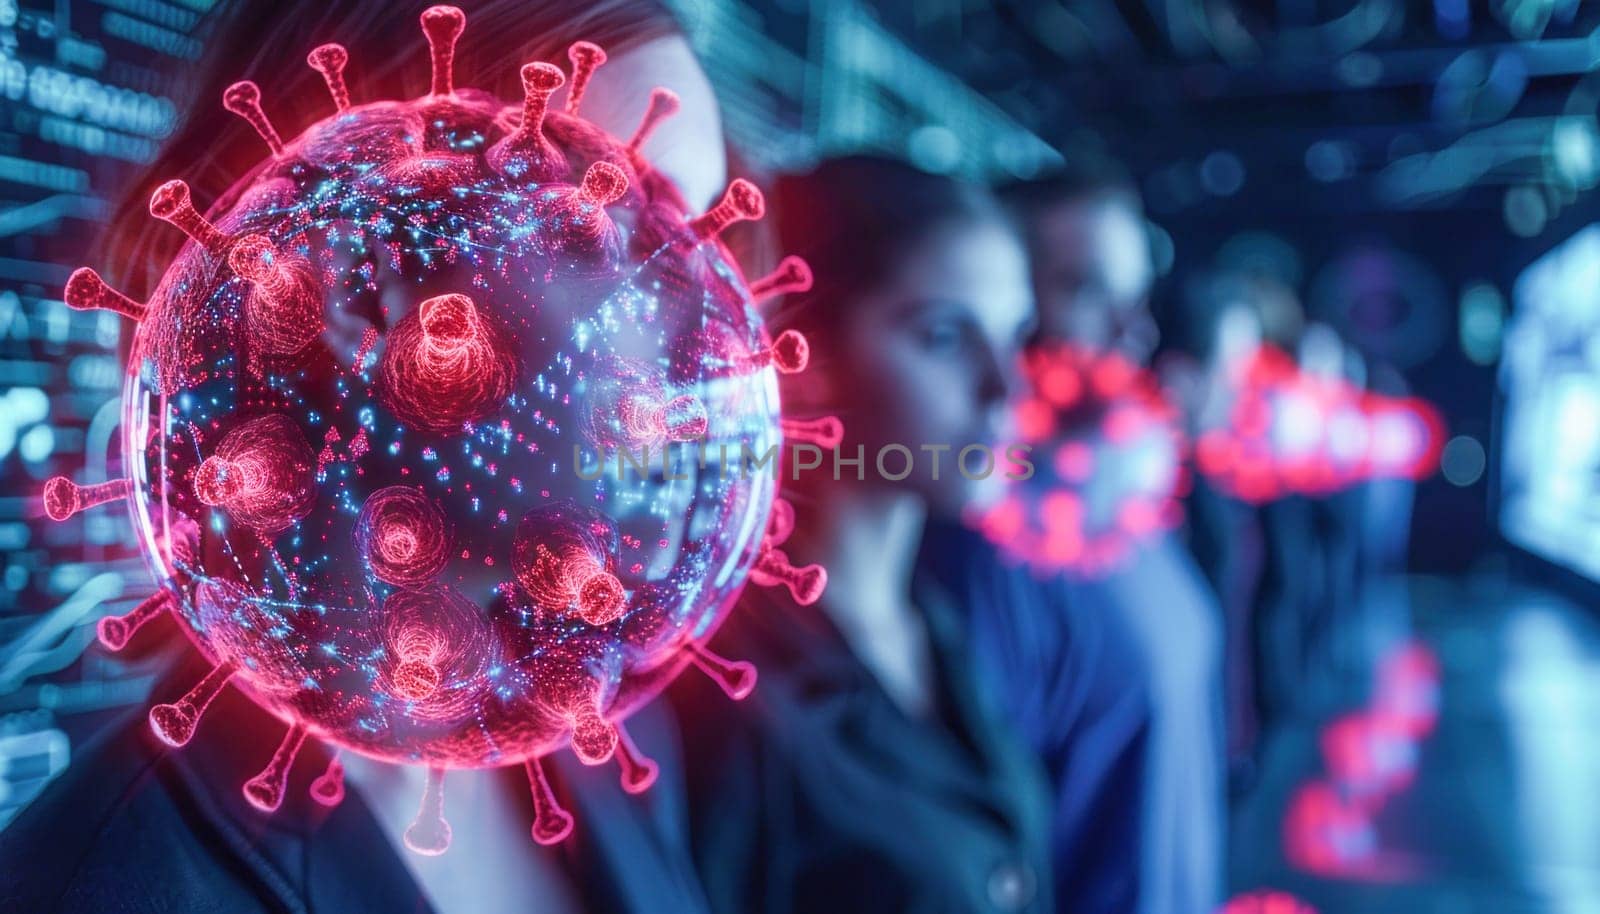 A woman is focused on a computer screen showing a virus infection, with various colors in the background